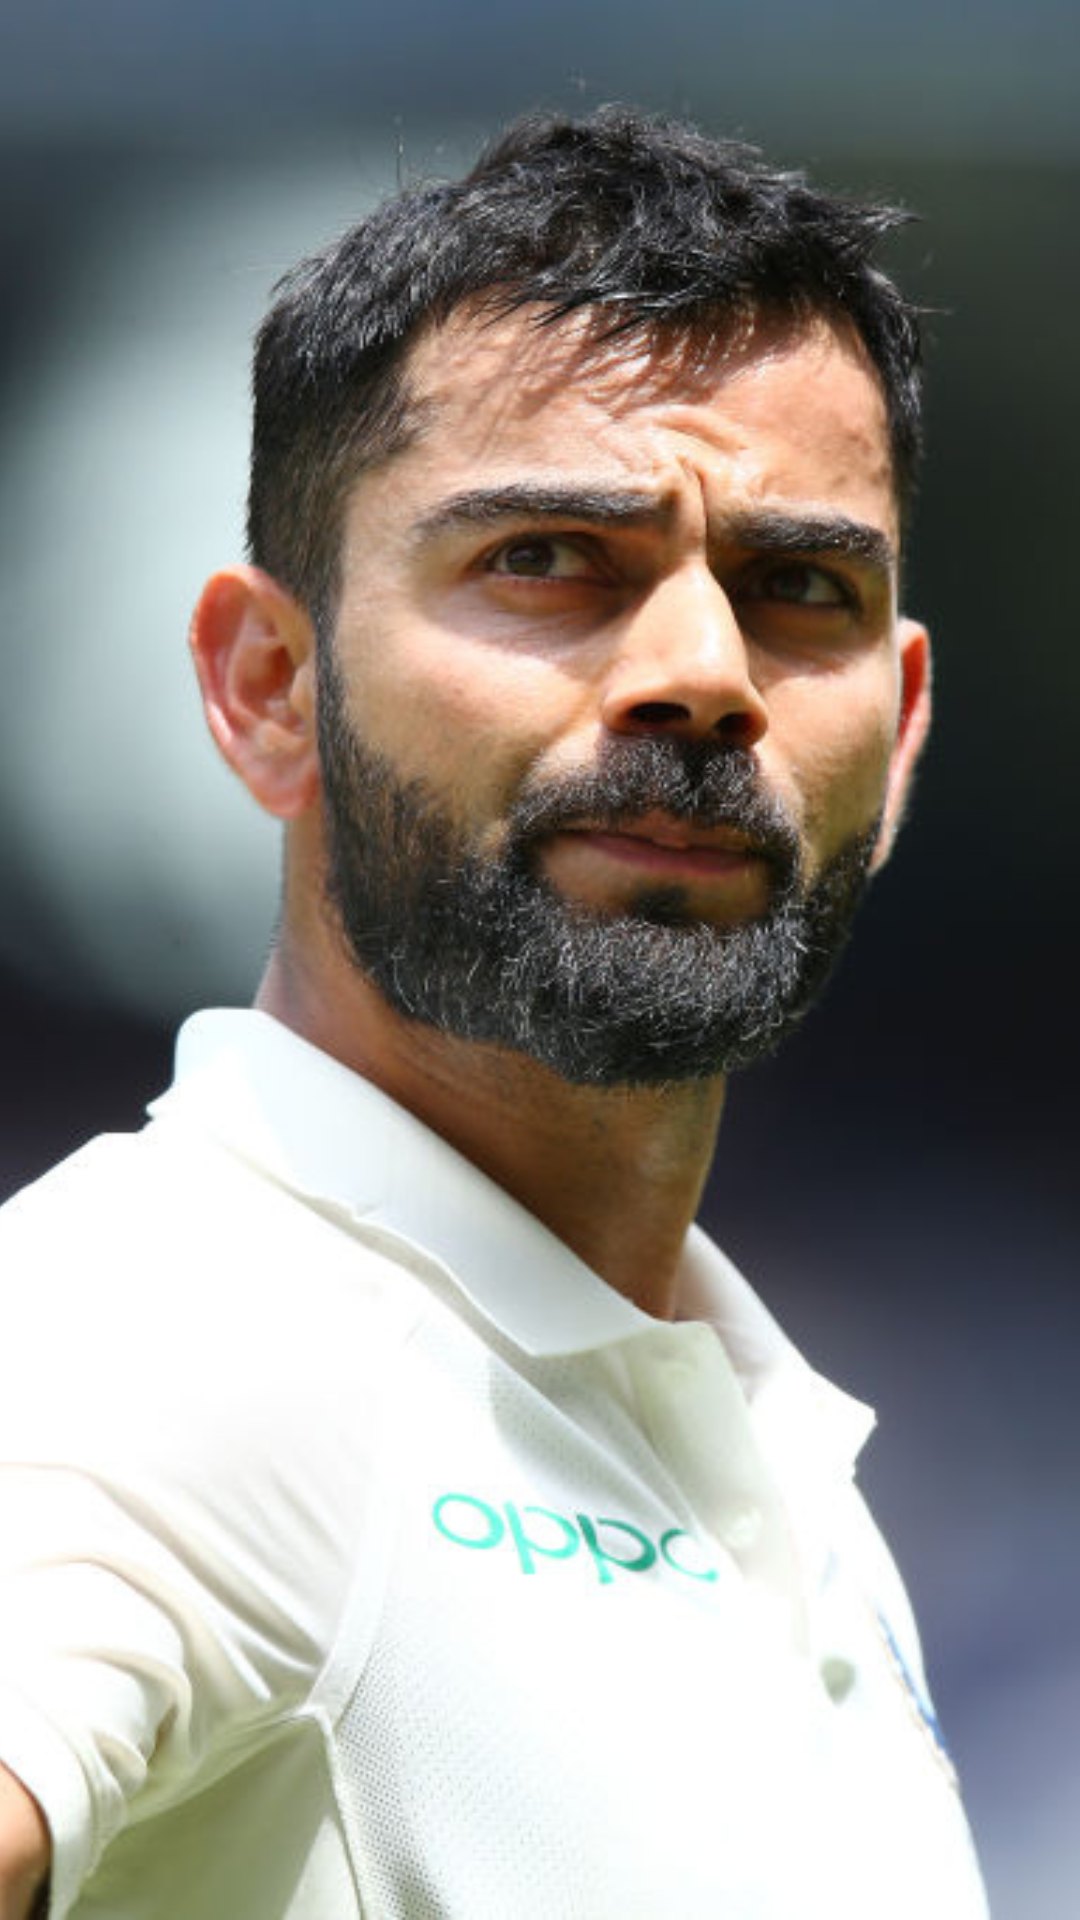 IND vs AUS: Looking at Virat Kohli's Test record against spinners ahead of Indore Test